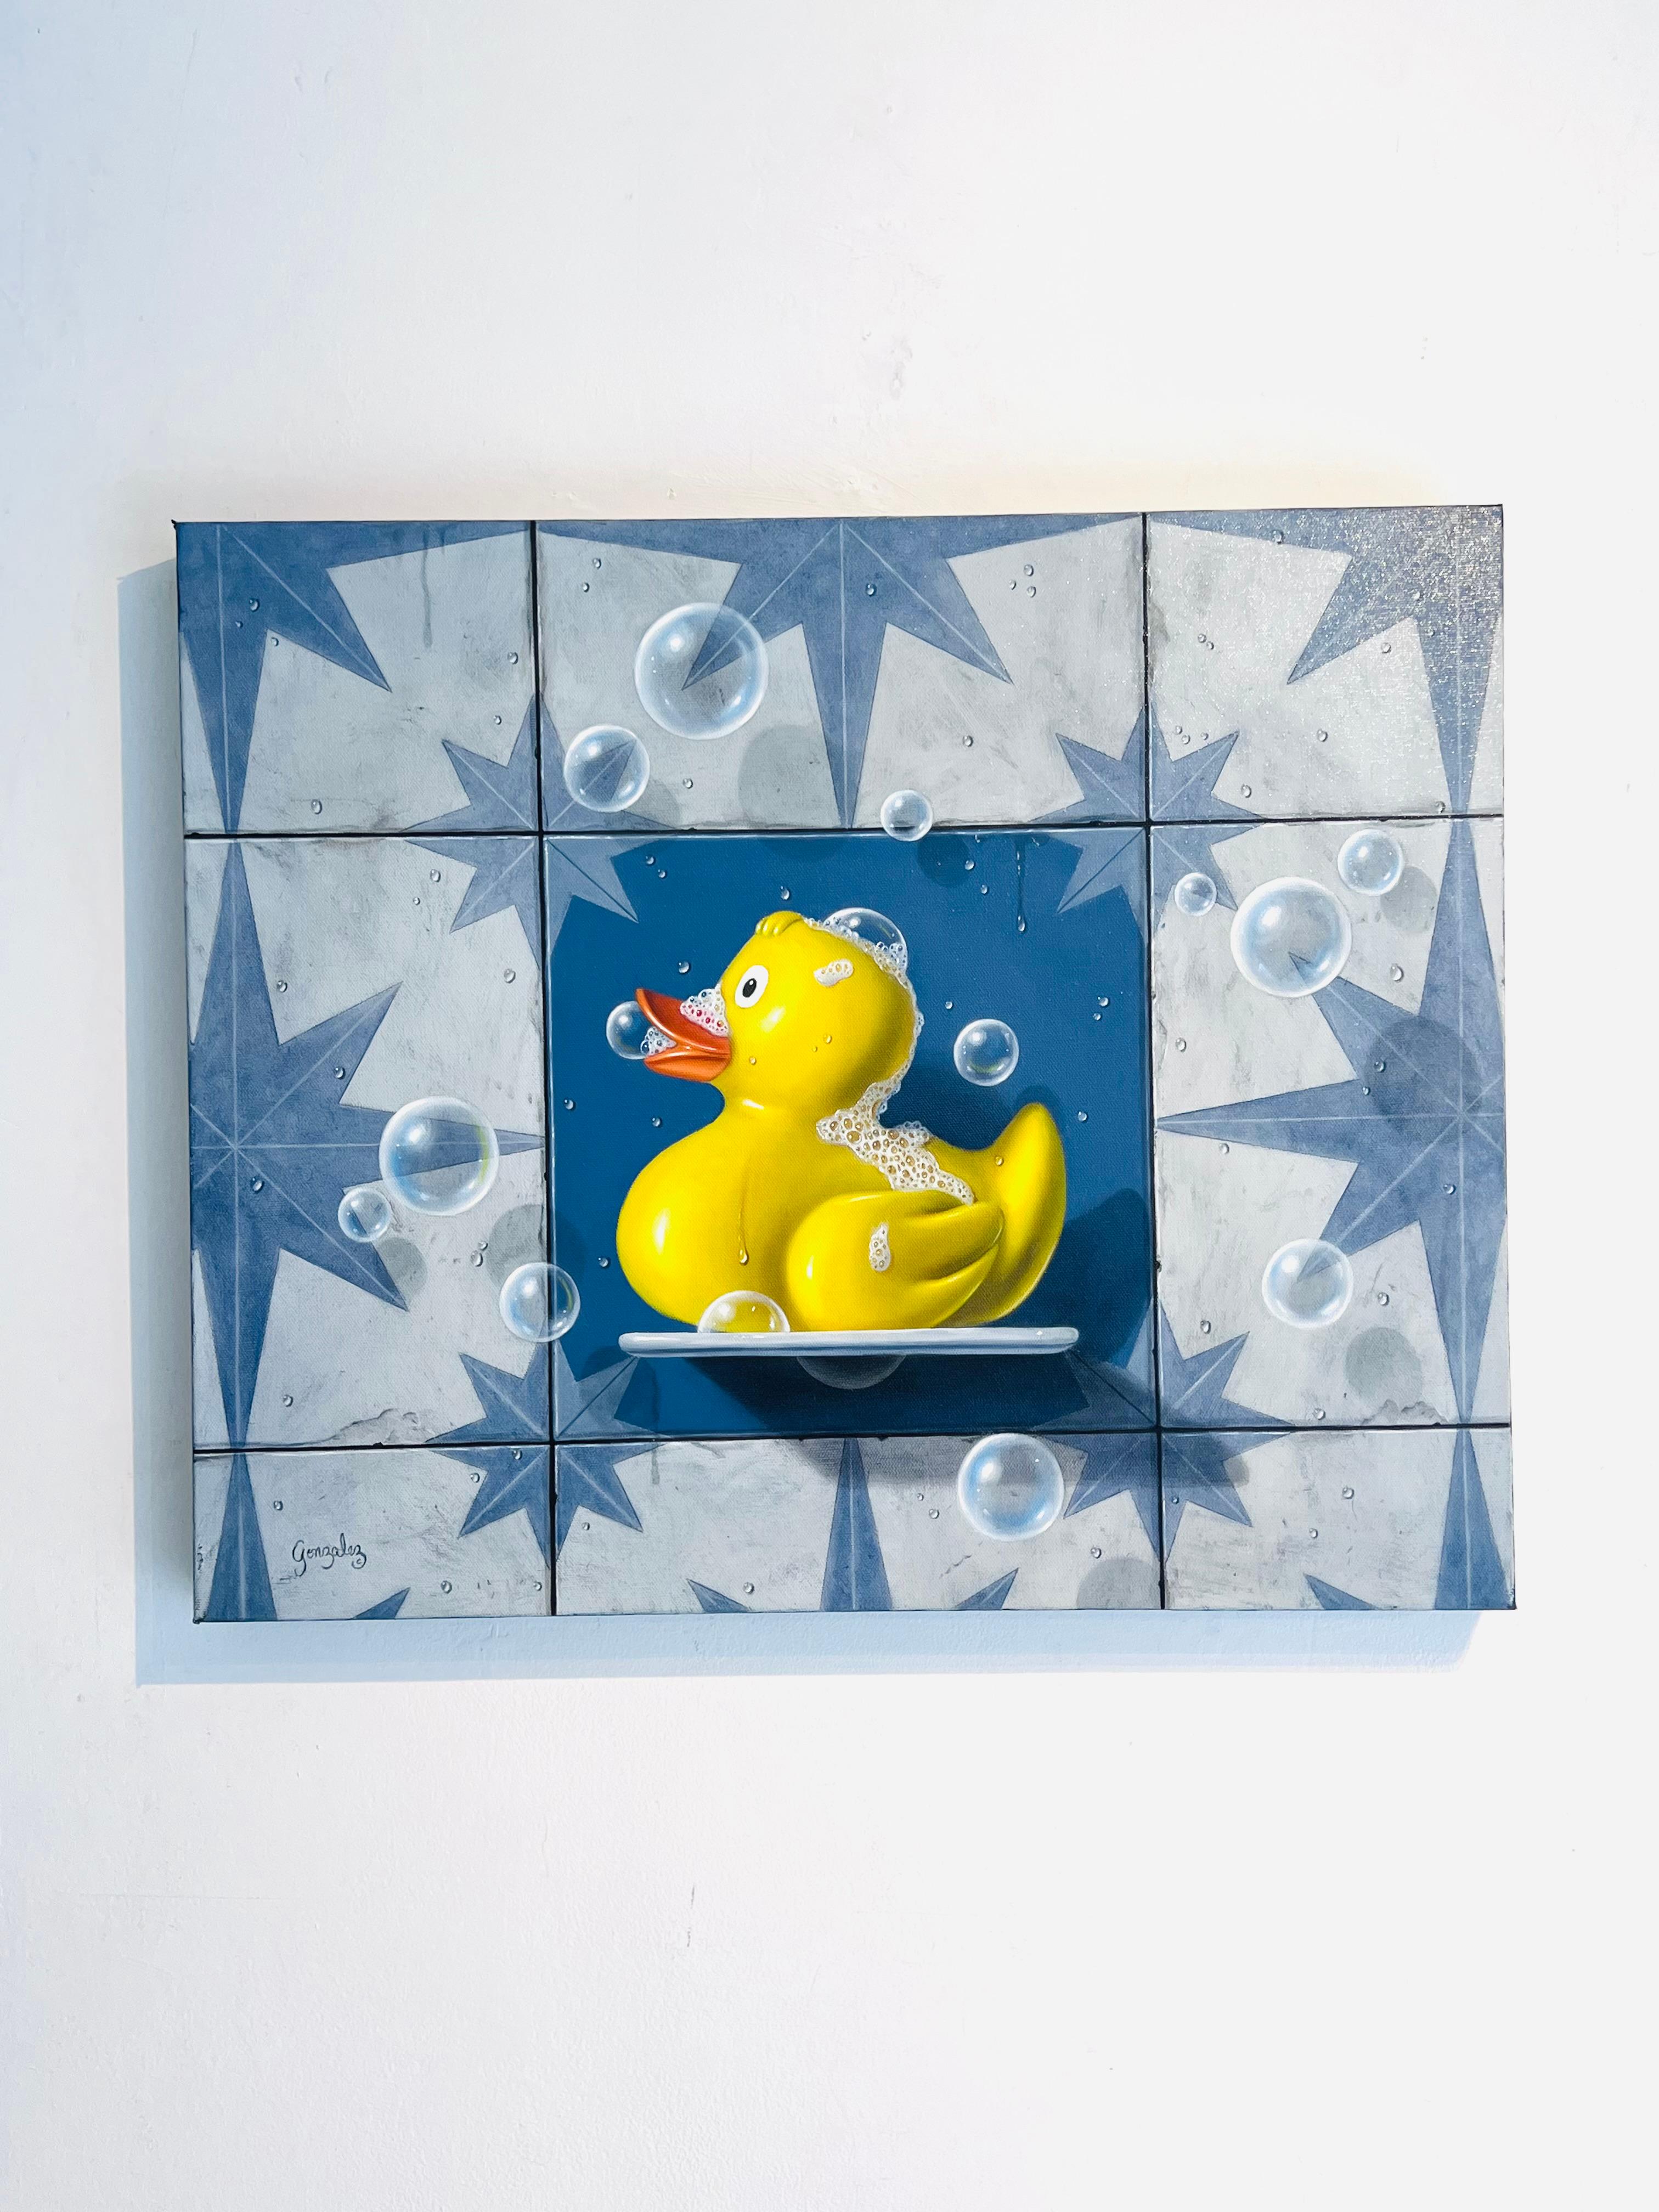 Rubber Ducky - original contemporary art, realistic oil painting, modern artwork - Painting by George A. Gonzalez